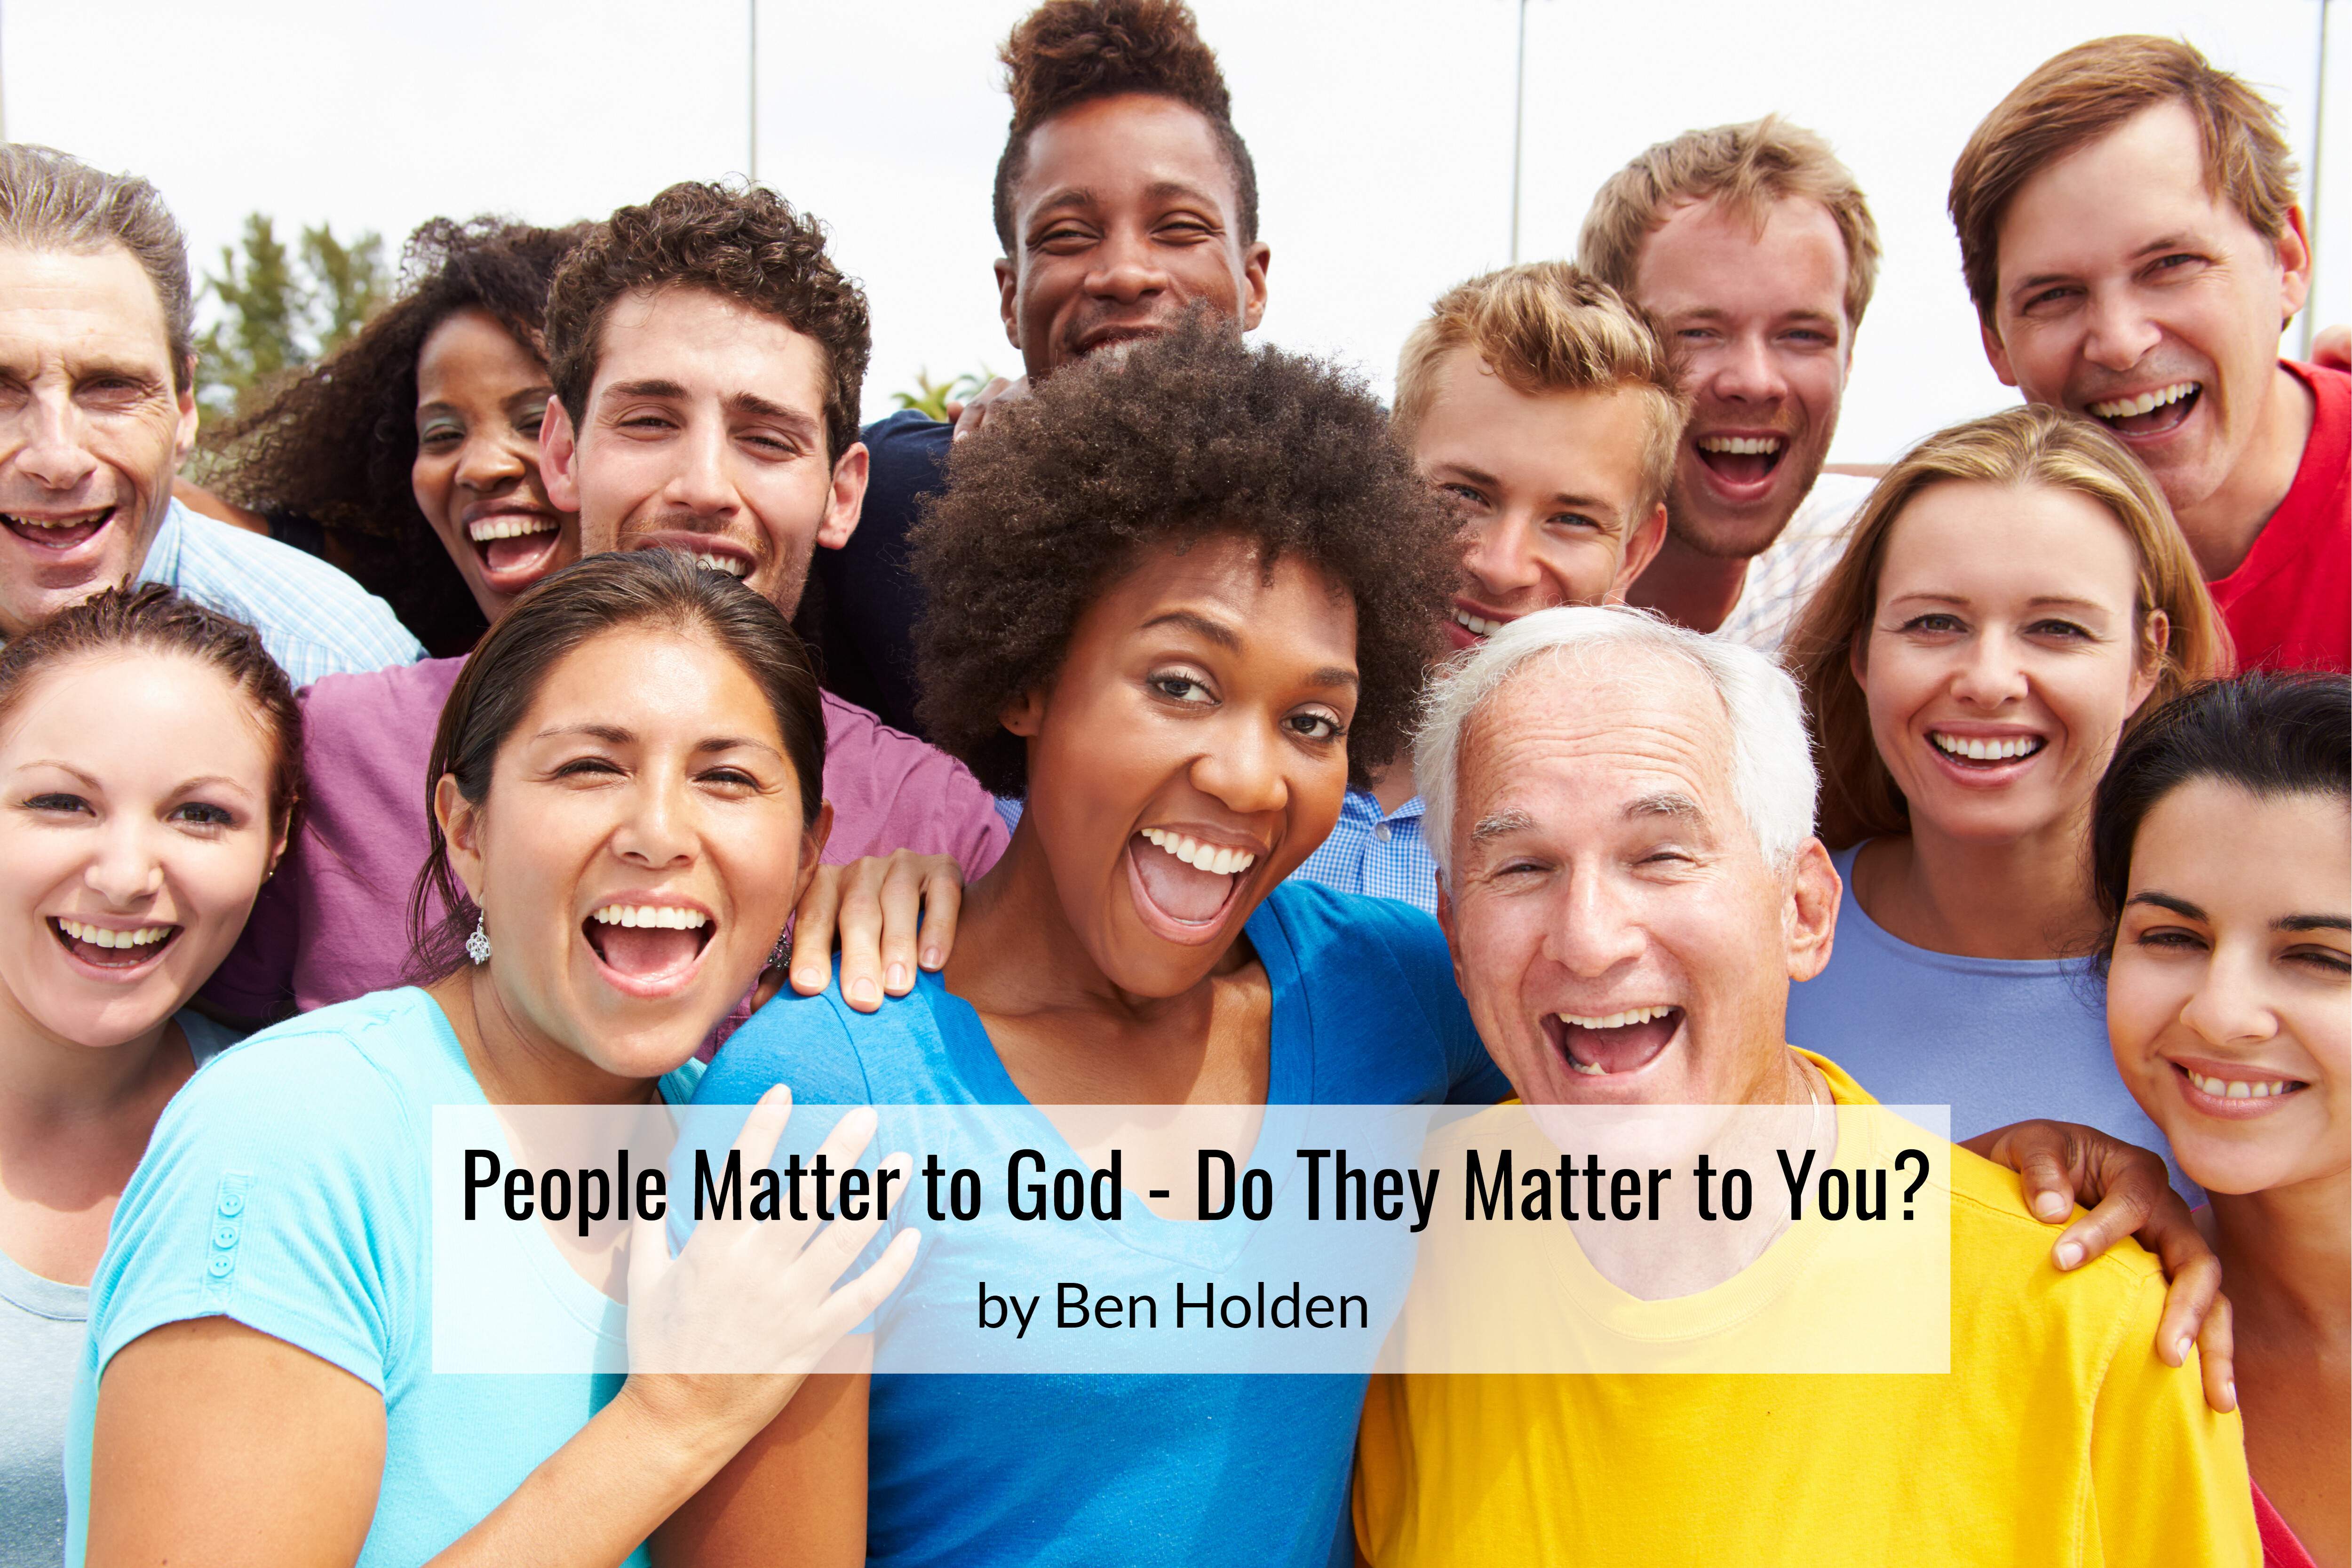 People Matter to God - Do They Matter to You?